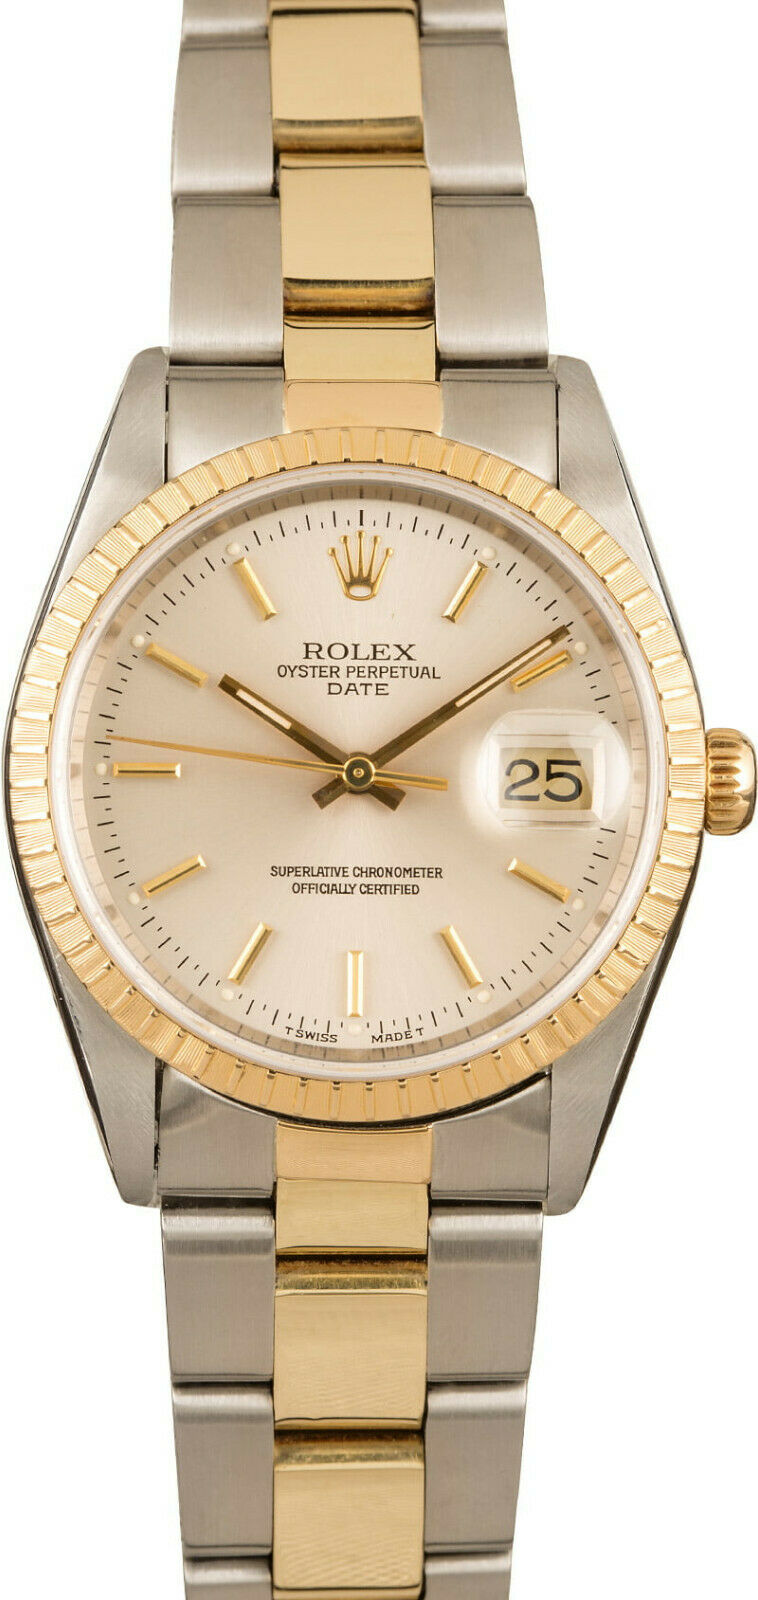 value of rolex oyster perpetual date